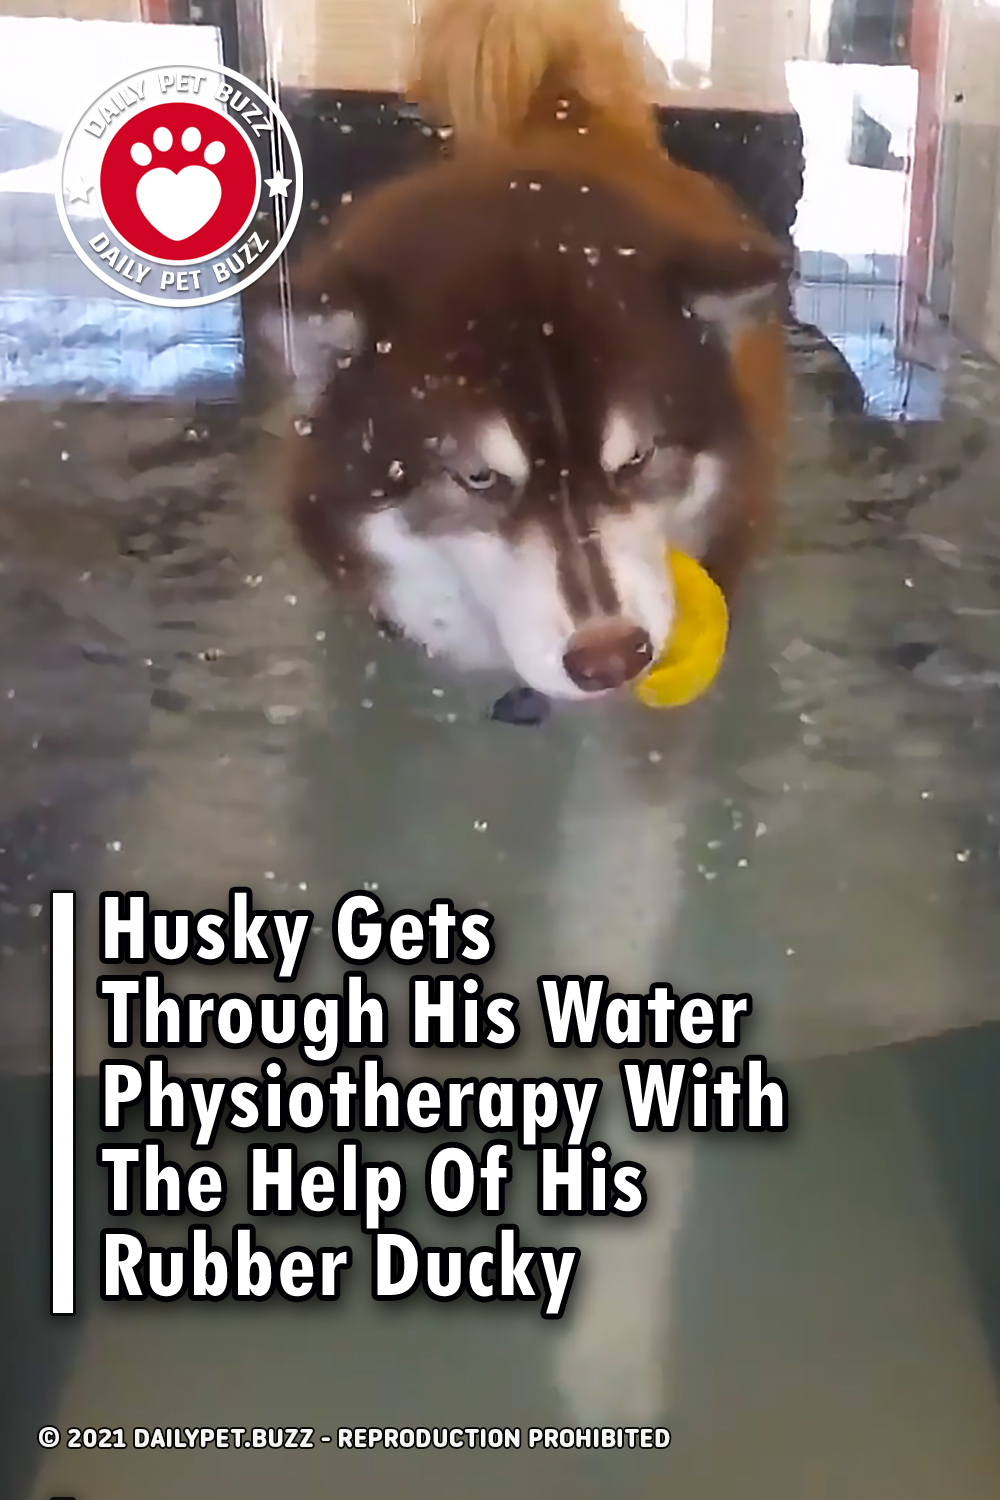 Husky Gets Through His Water Physiotherapy With The Help Of His Rubber Ducky